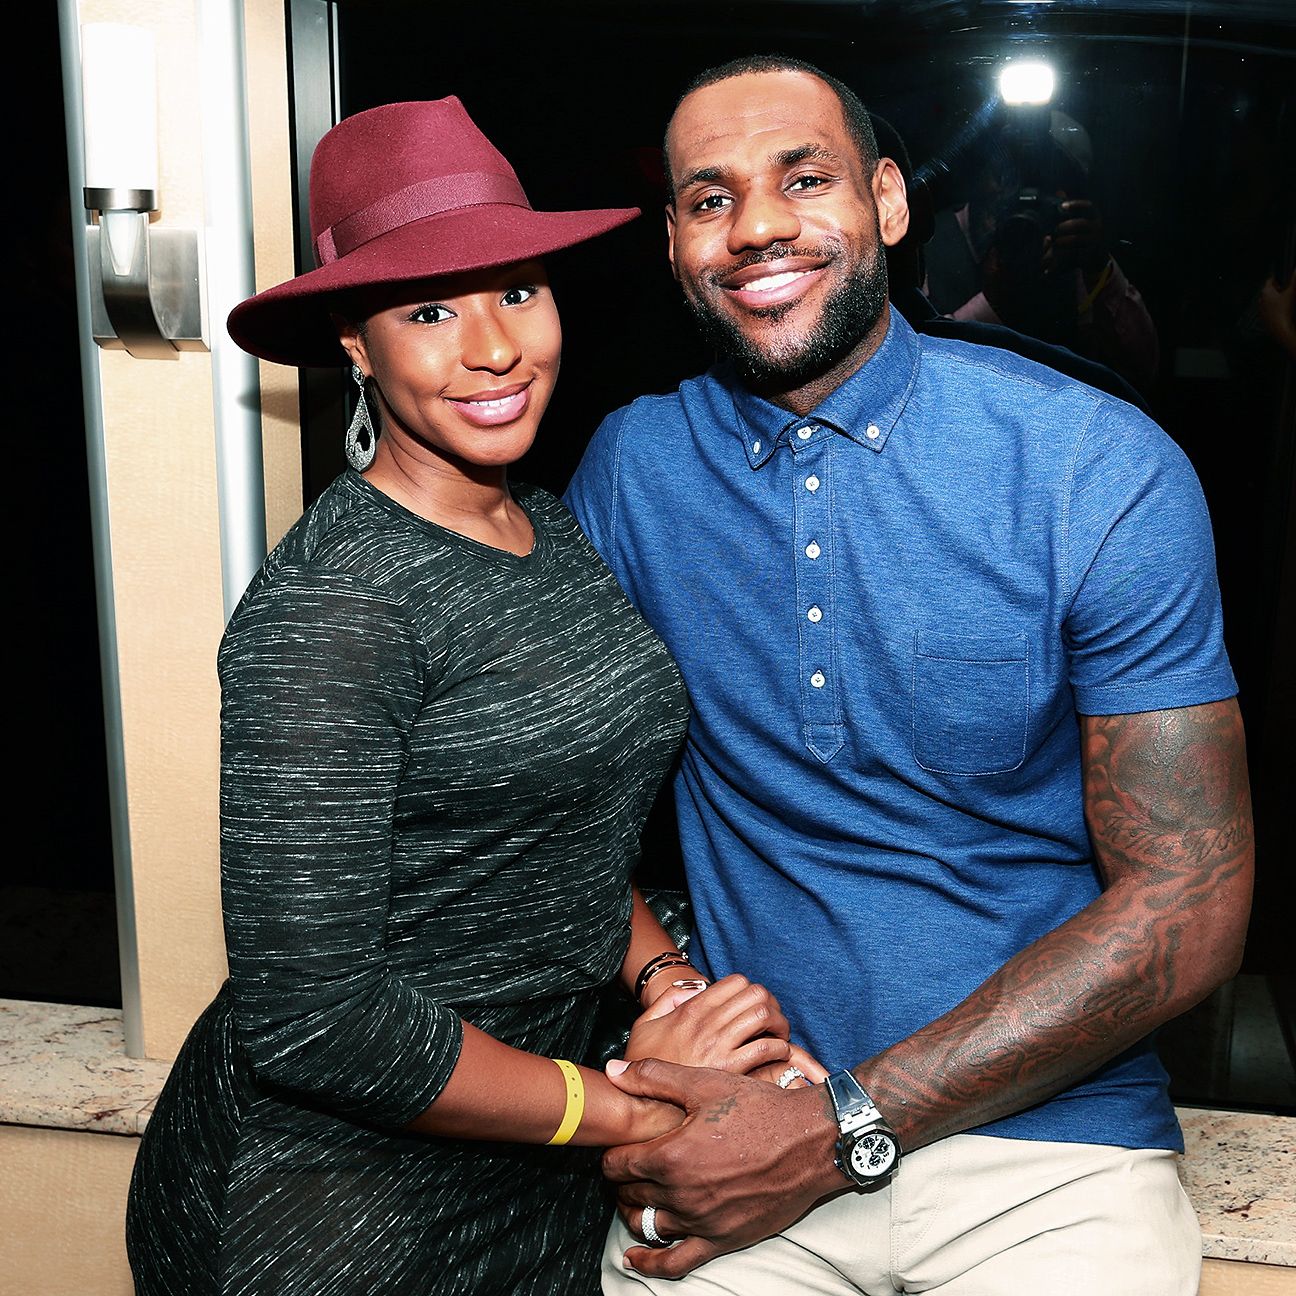 Instagram post by LeBron James' wife, Savannah James, refers to family